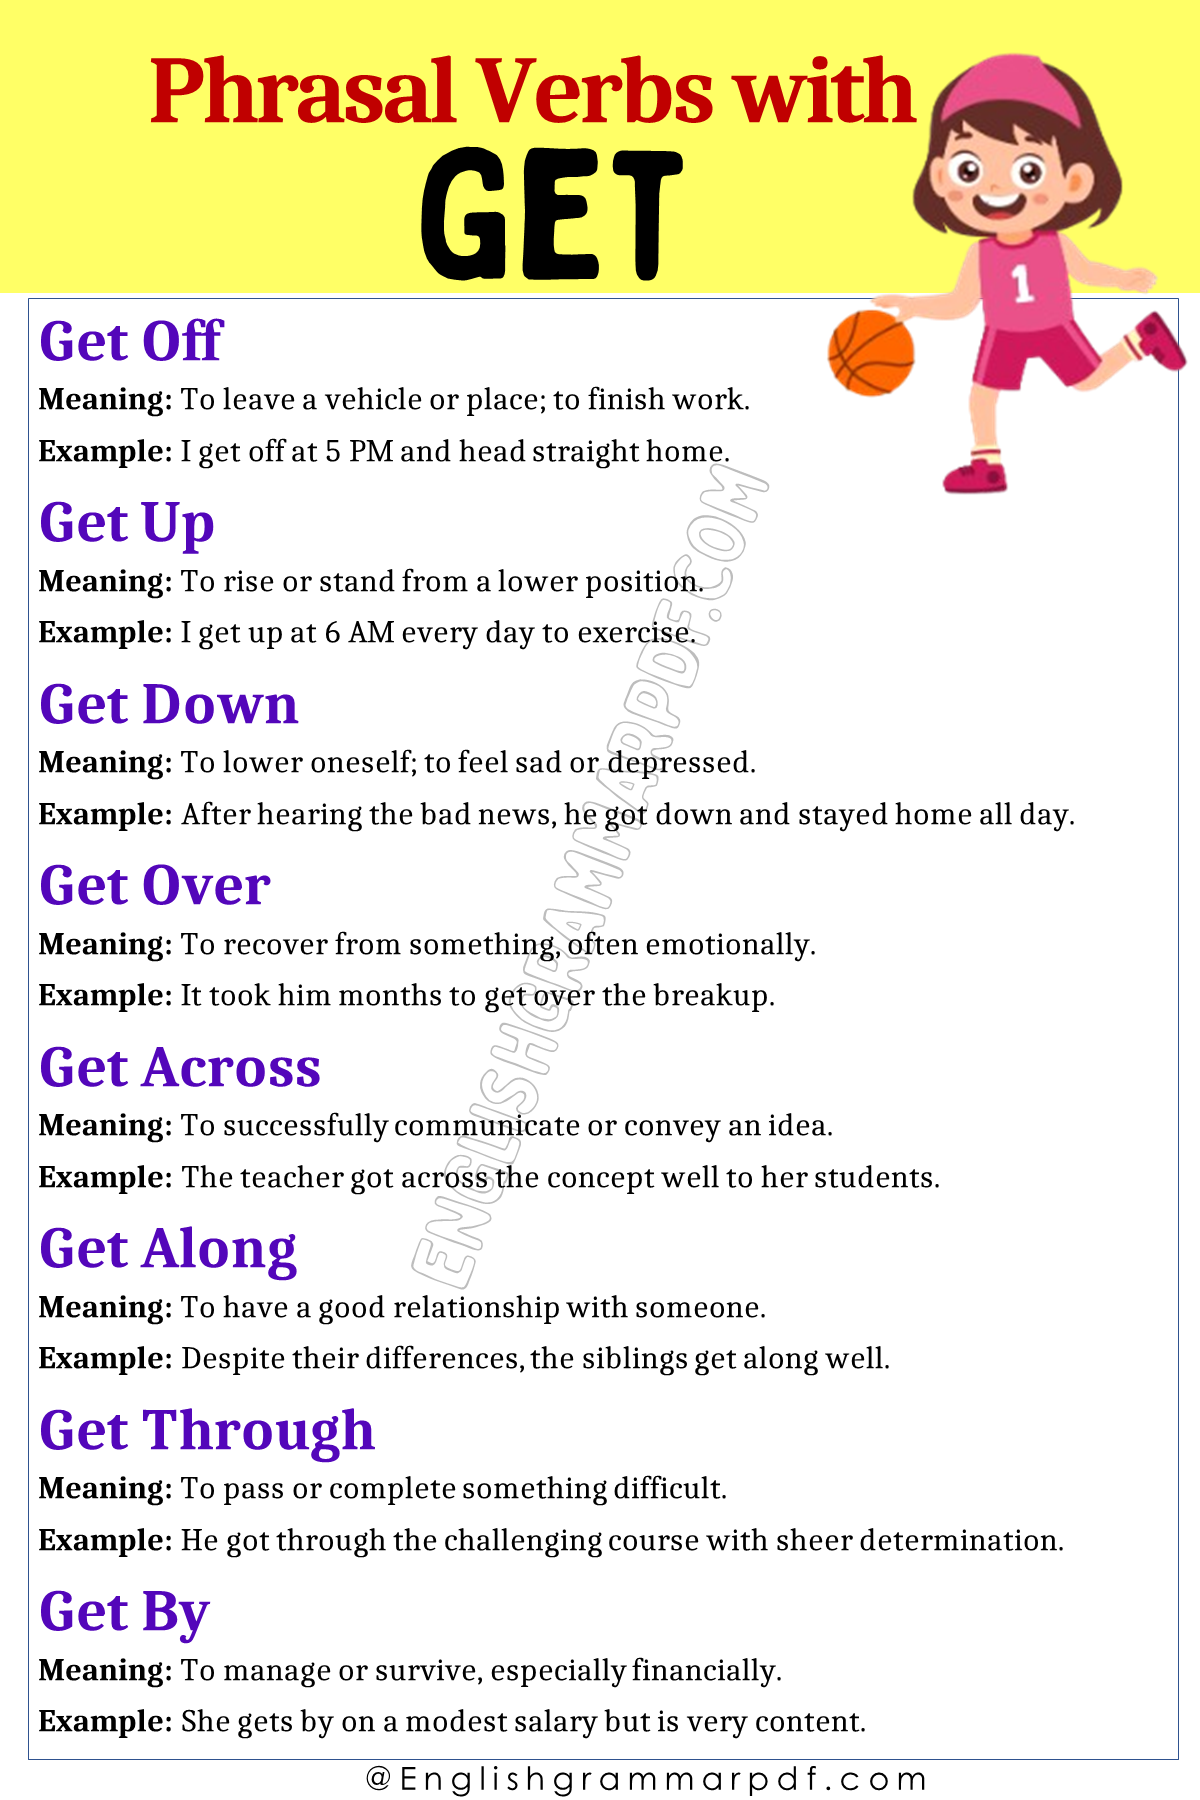 Phrasal Verbs with Get